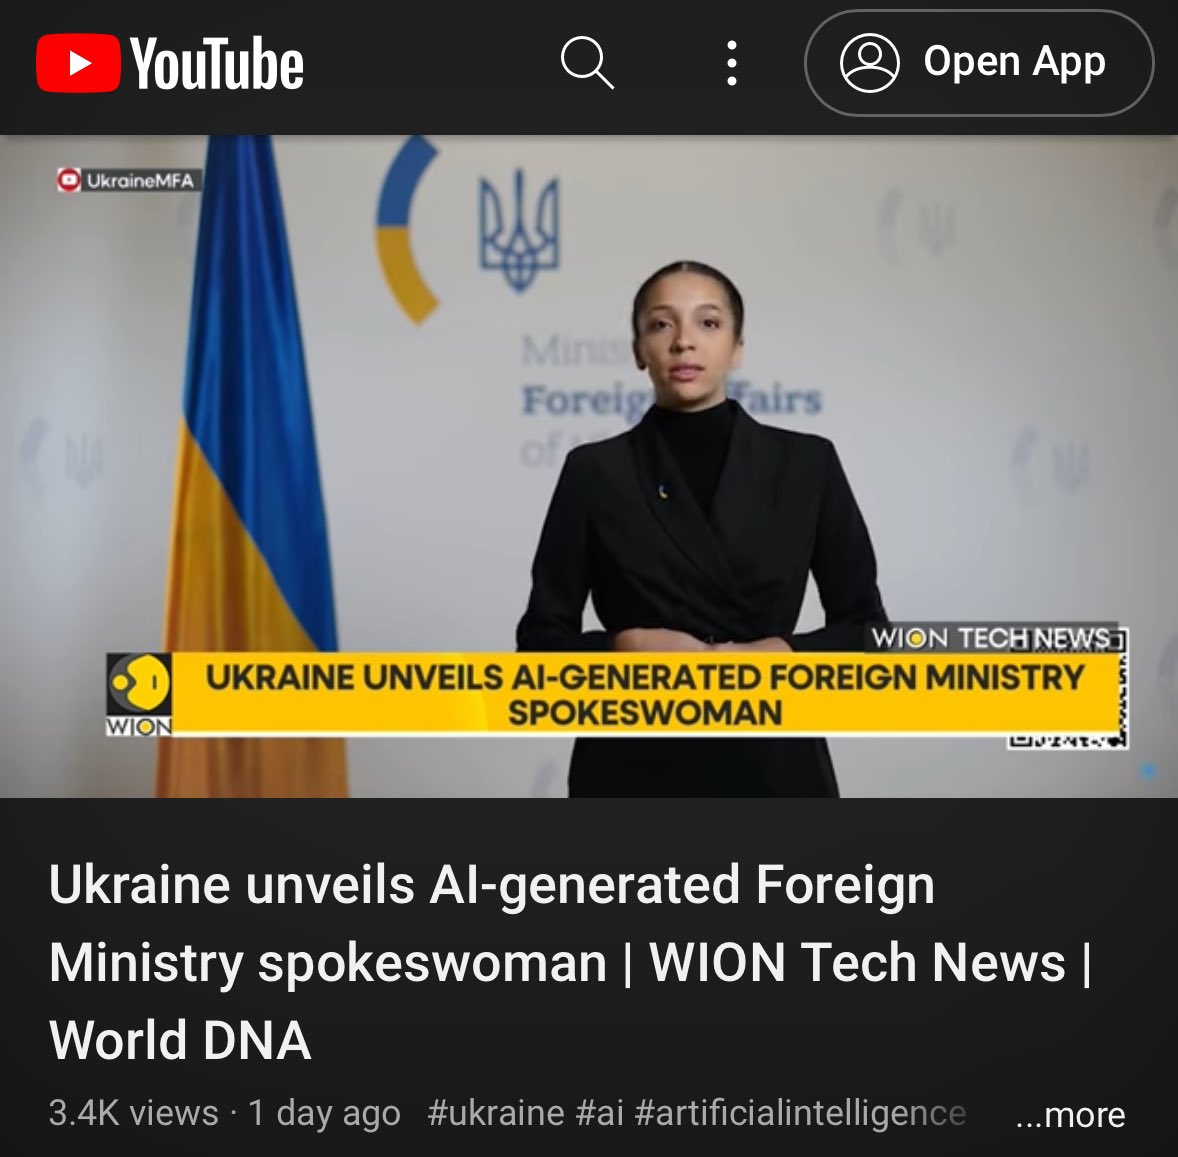 Ukraine's Foreign Ministry unveils Victoria Shi, an AI-generated spokeswoman, to relay official statements. Meet the digital envoy reshaping diplomacy with efficiency and innovation. #AI #Diplomacy